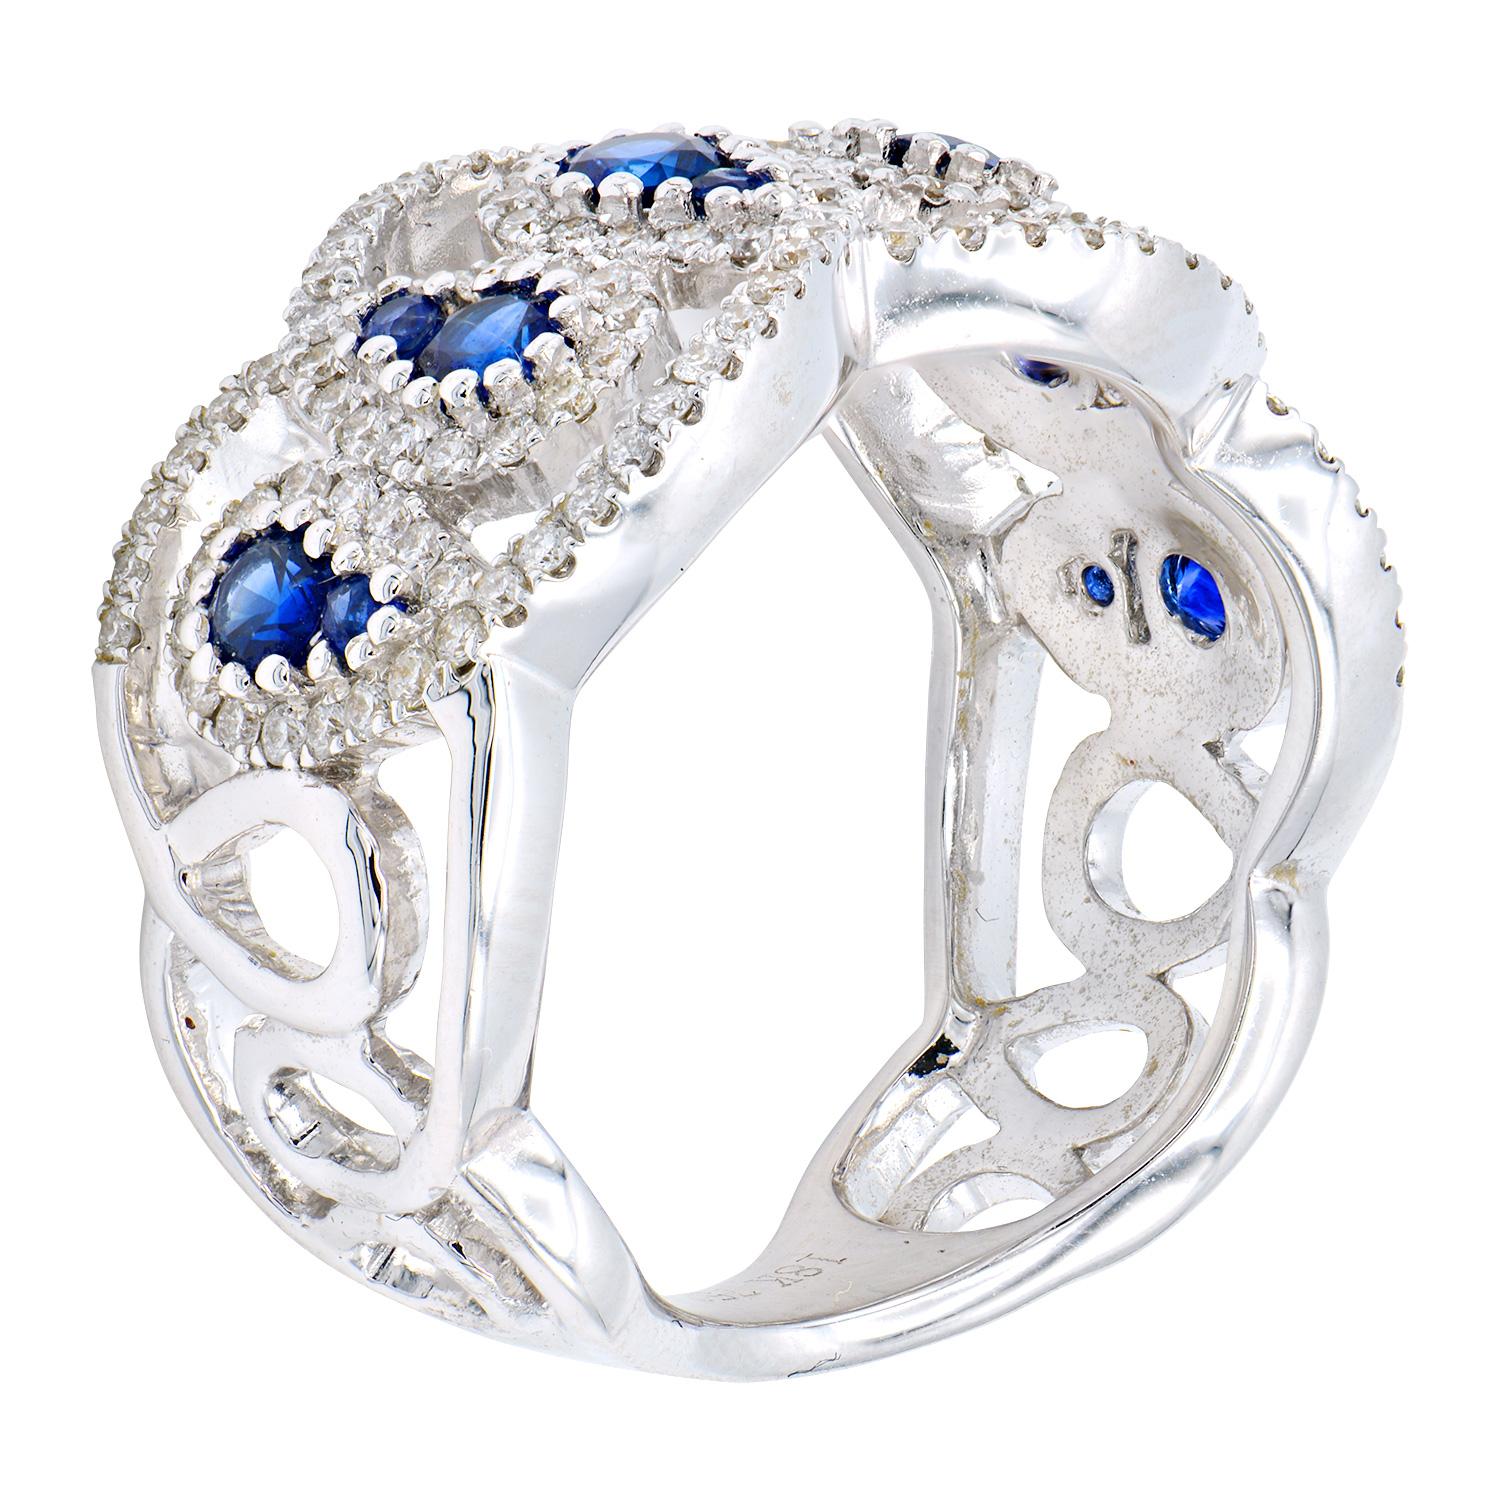 This unique and beautiful ring is made from 2 sizes of sapphires and diamonds. There are 12 sapphires totaling 0.79 carats which are stacked in a drop shape which are surrounded by beautifully designed 140 round VS2, G color diamonds totaling 0.67